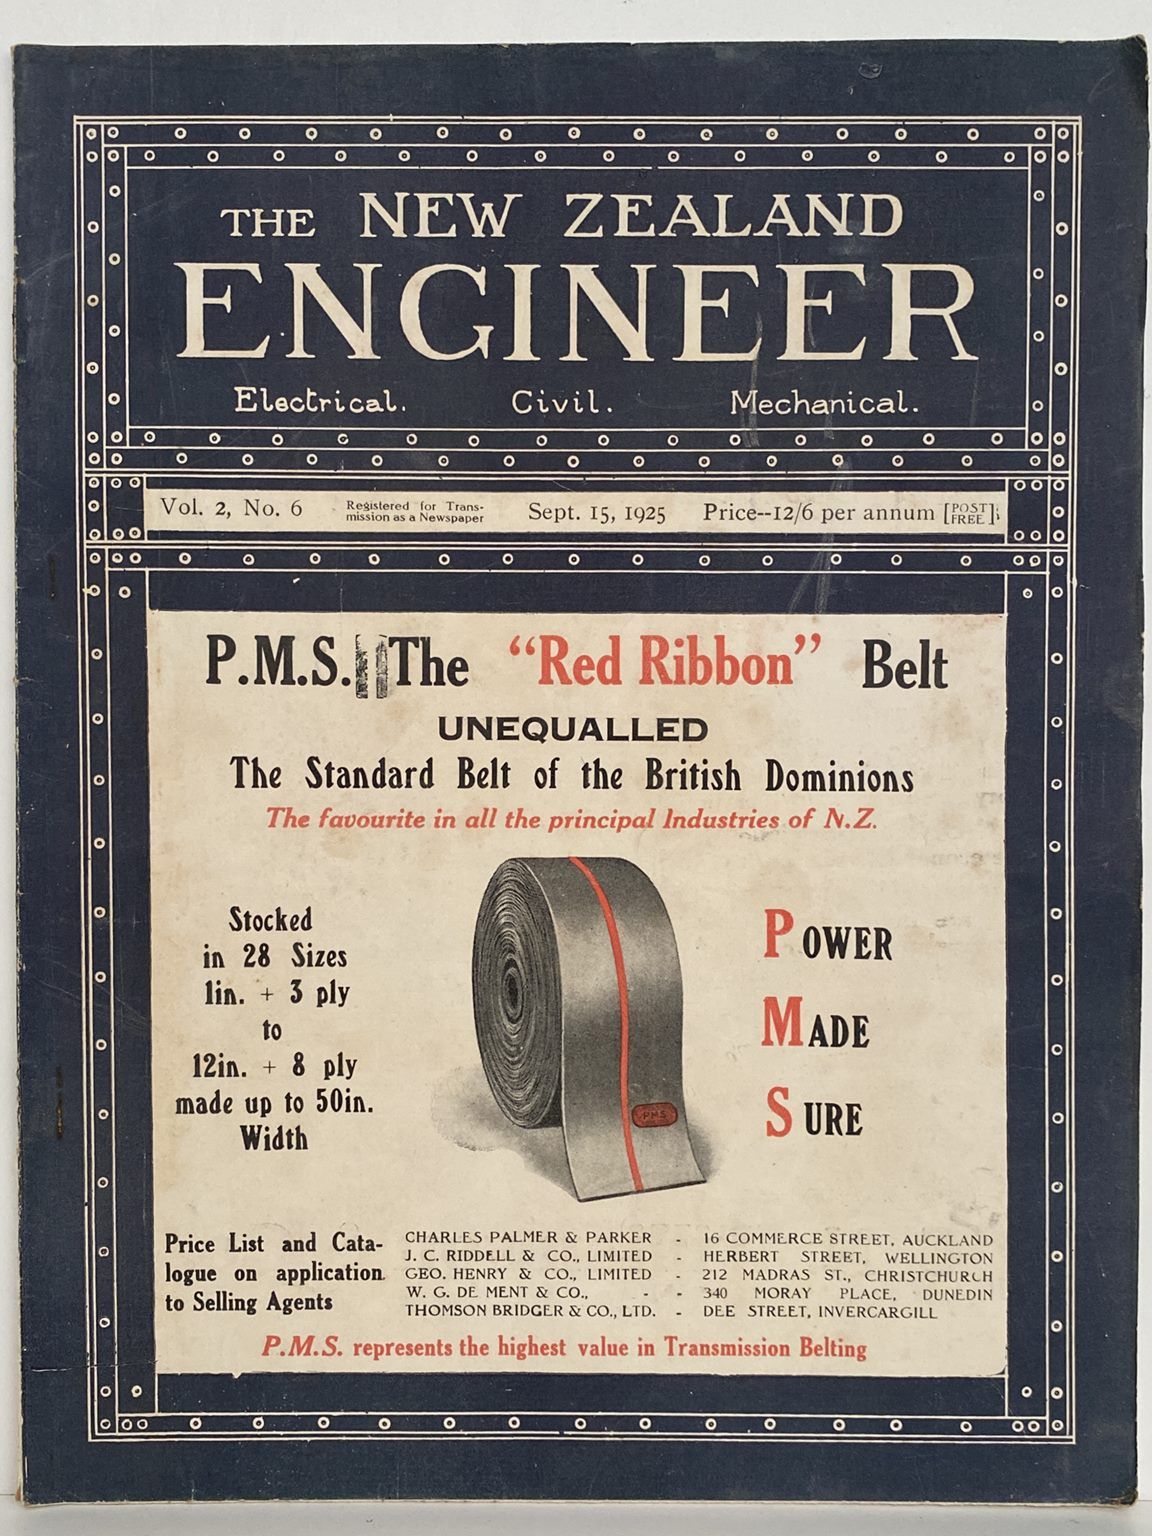 OLD MAGAZINE: The New Zealand Engineer Vol. 2, No. 6 - 15 September 1925